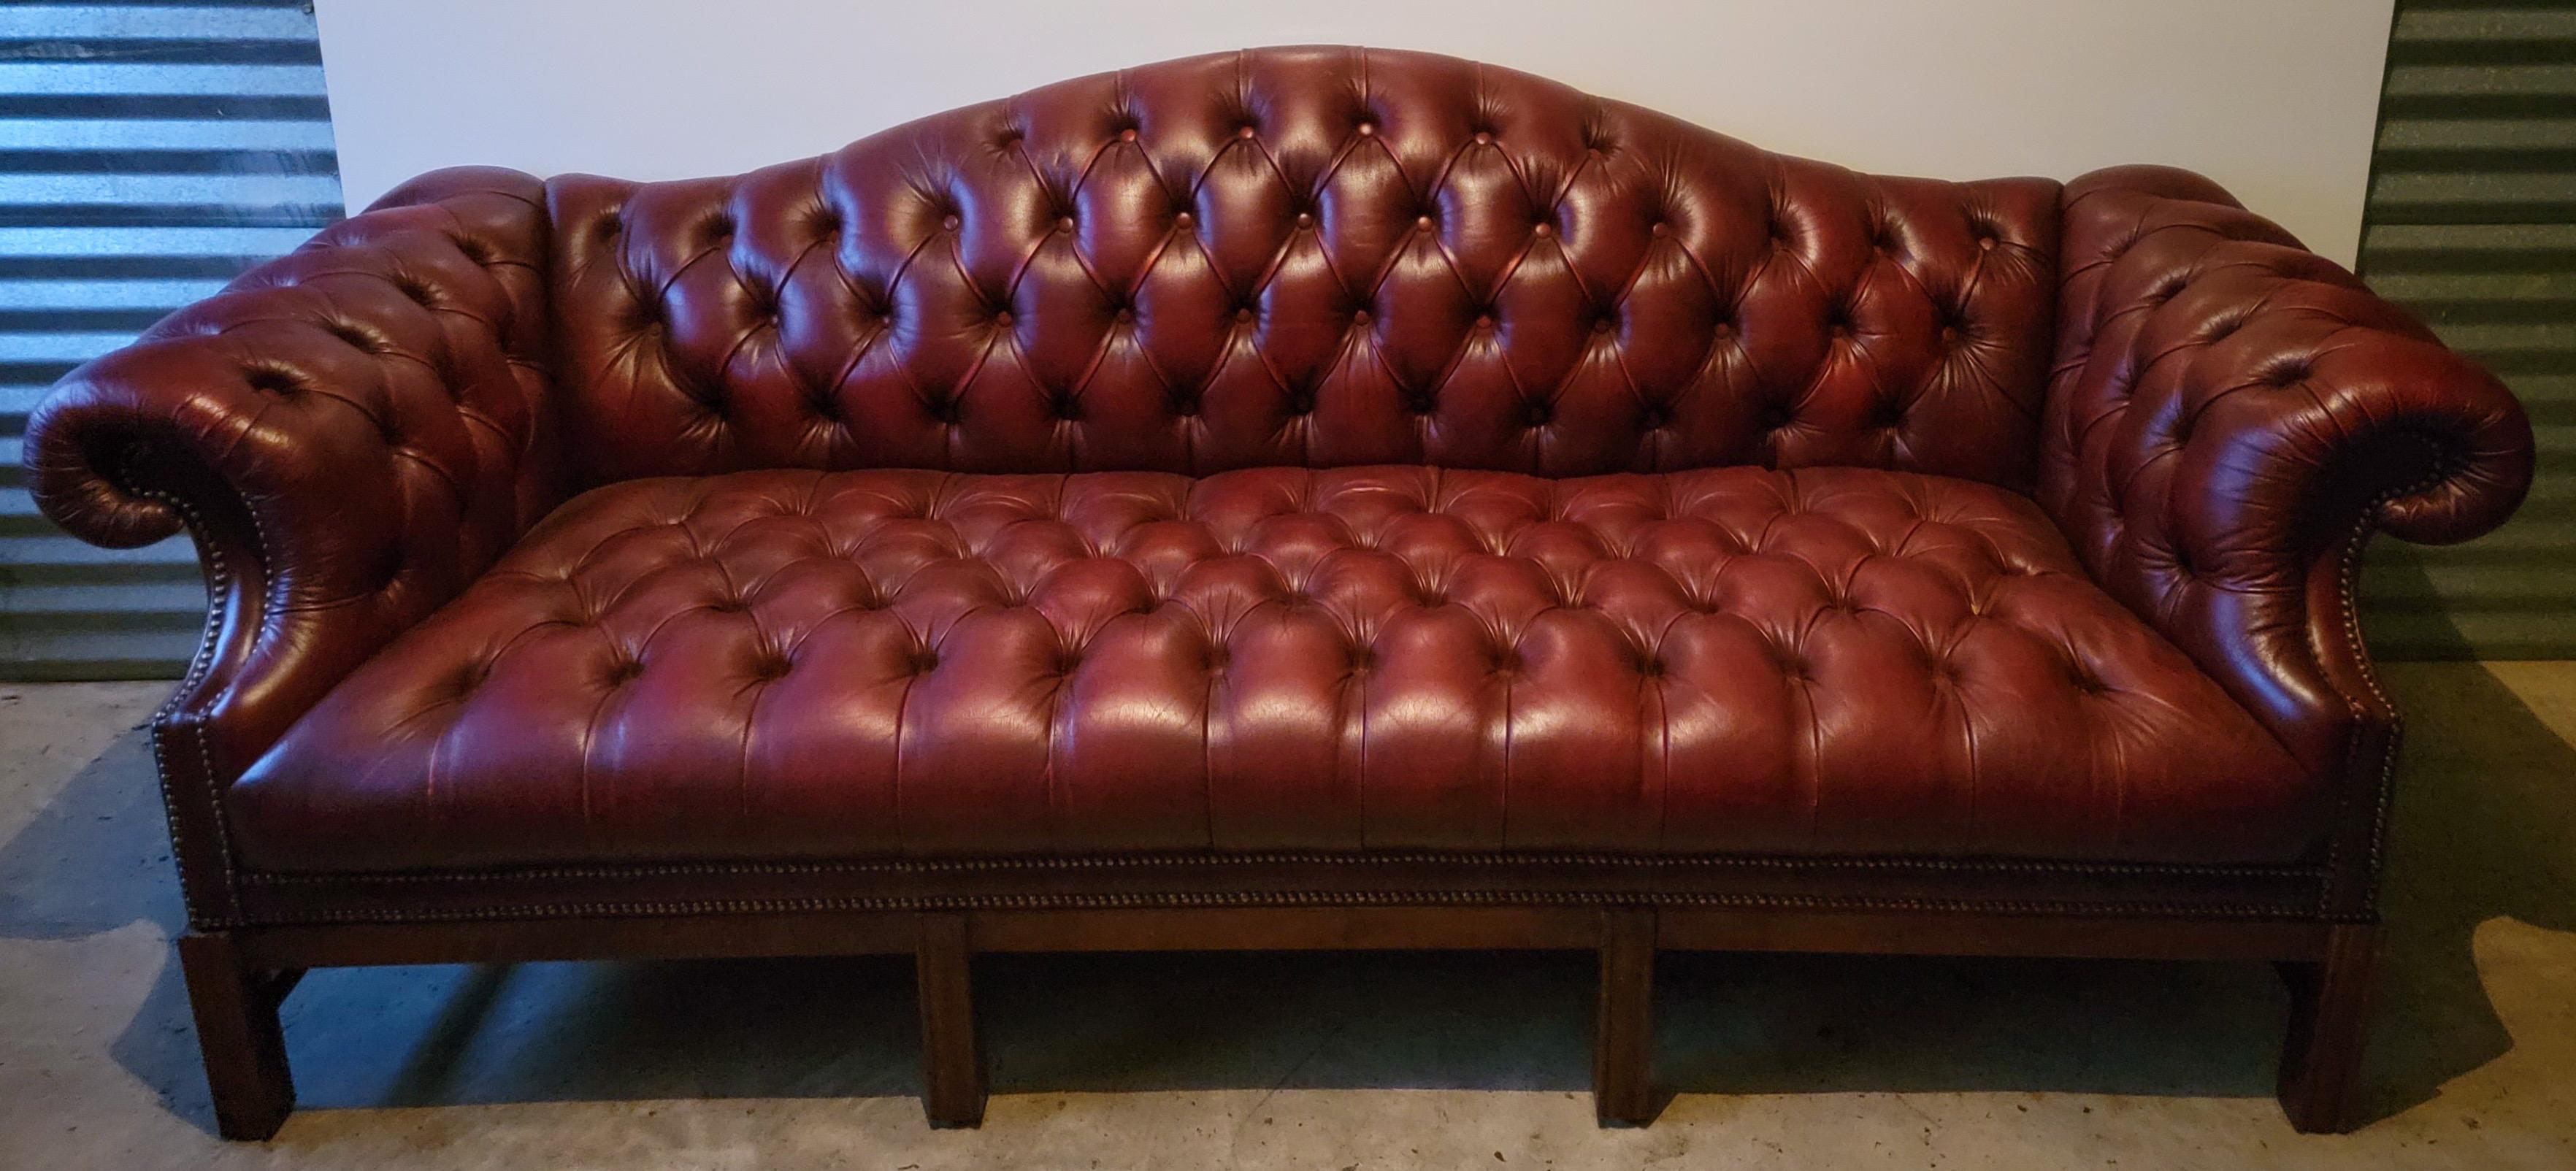 Mid-20th Century 1950s English Burgundy Tufted Leather Chesterfield Camelback Sofa